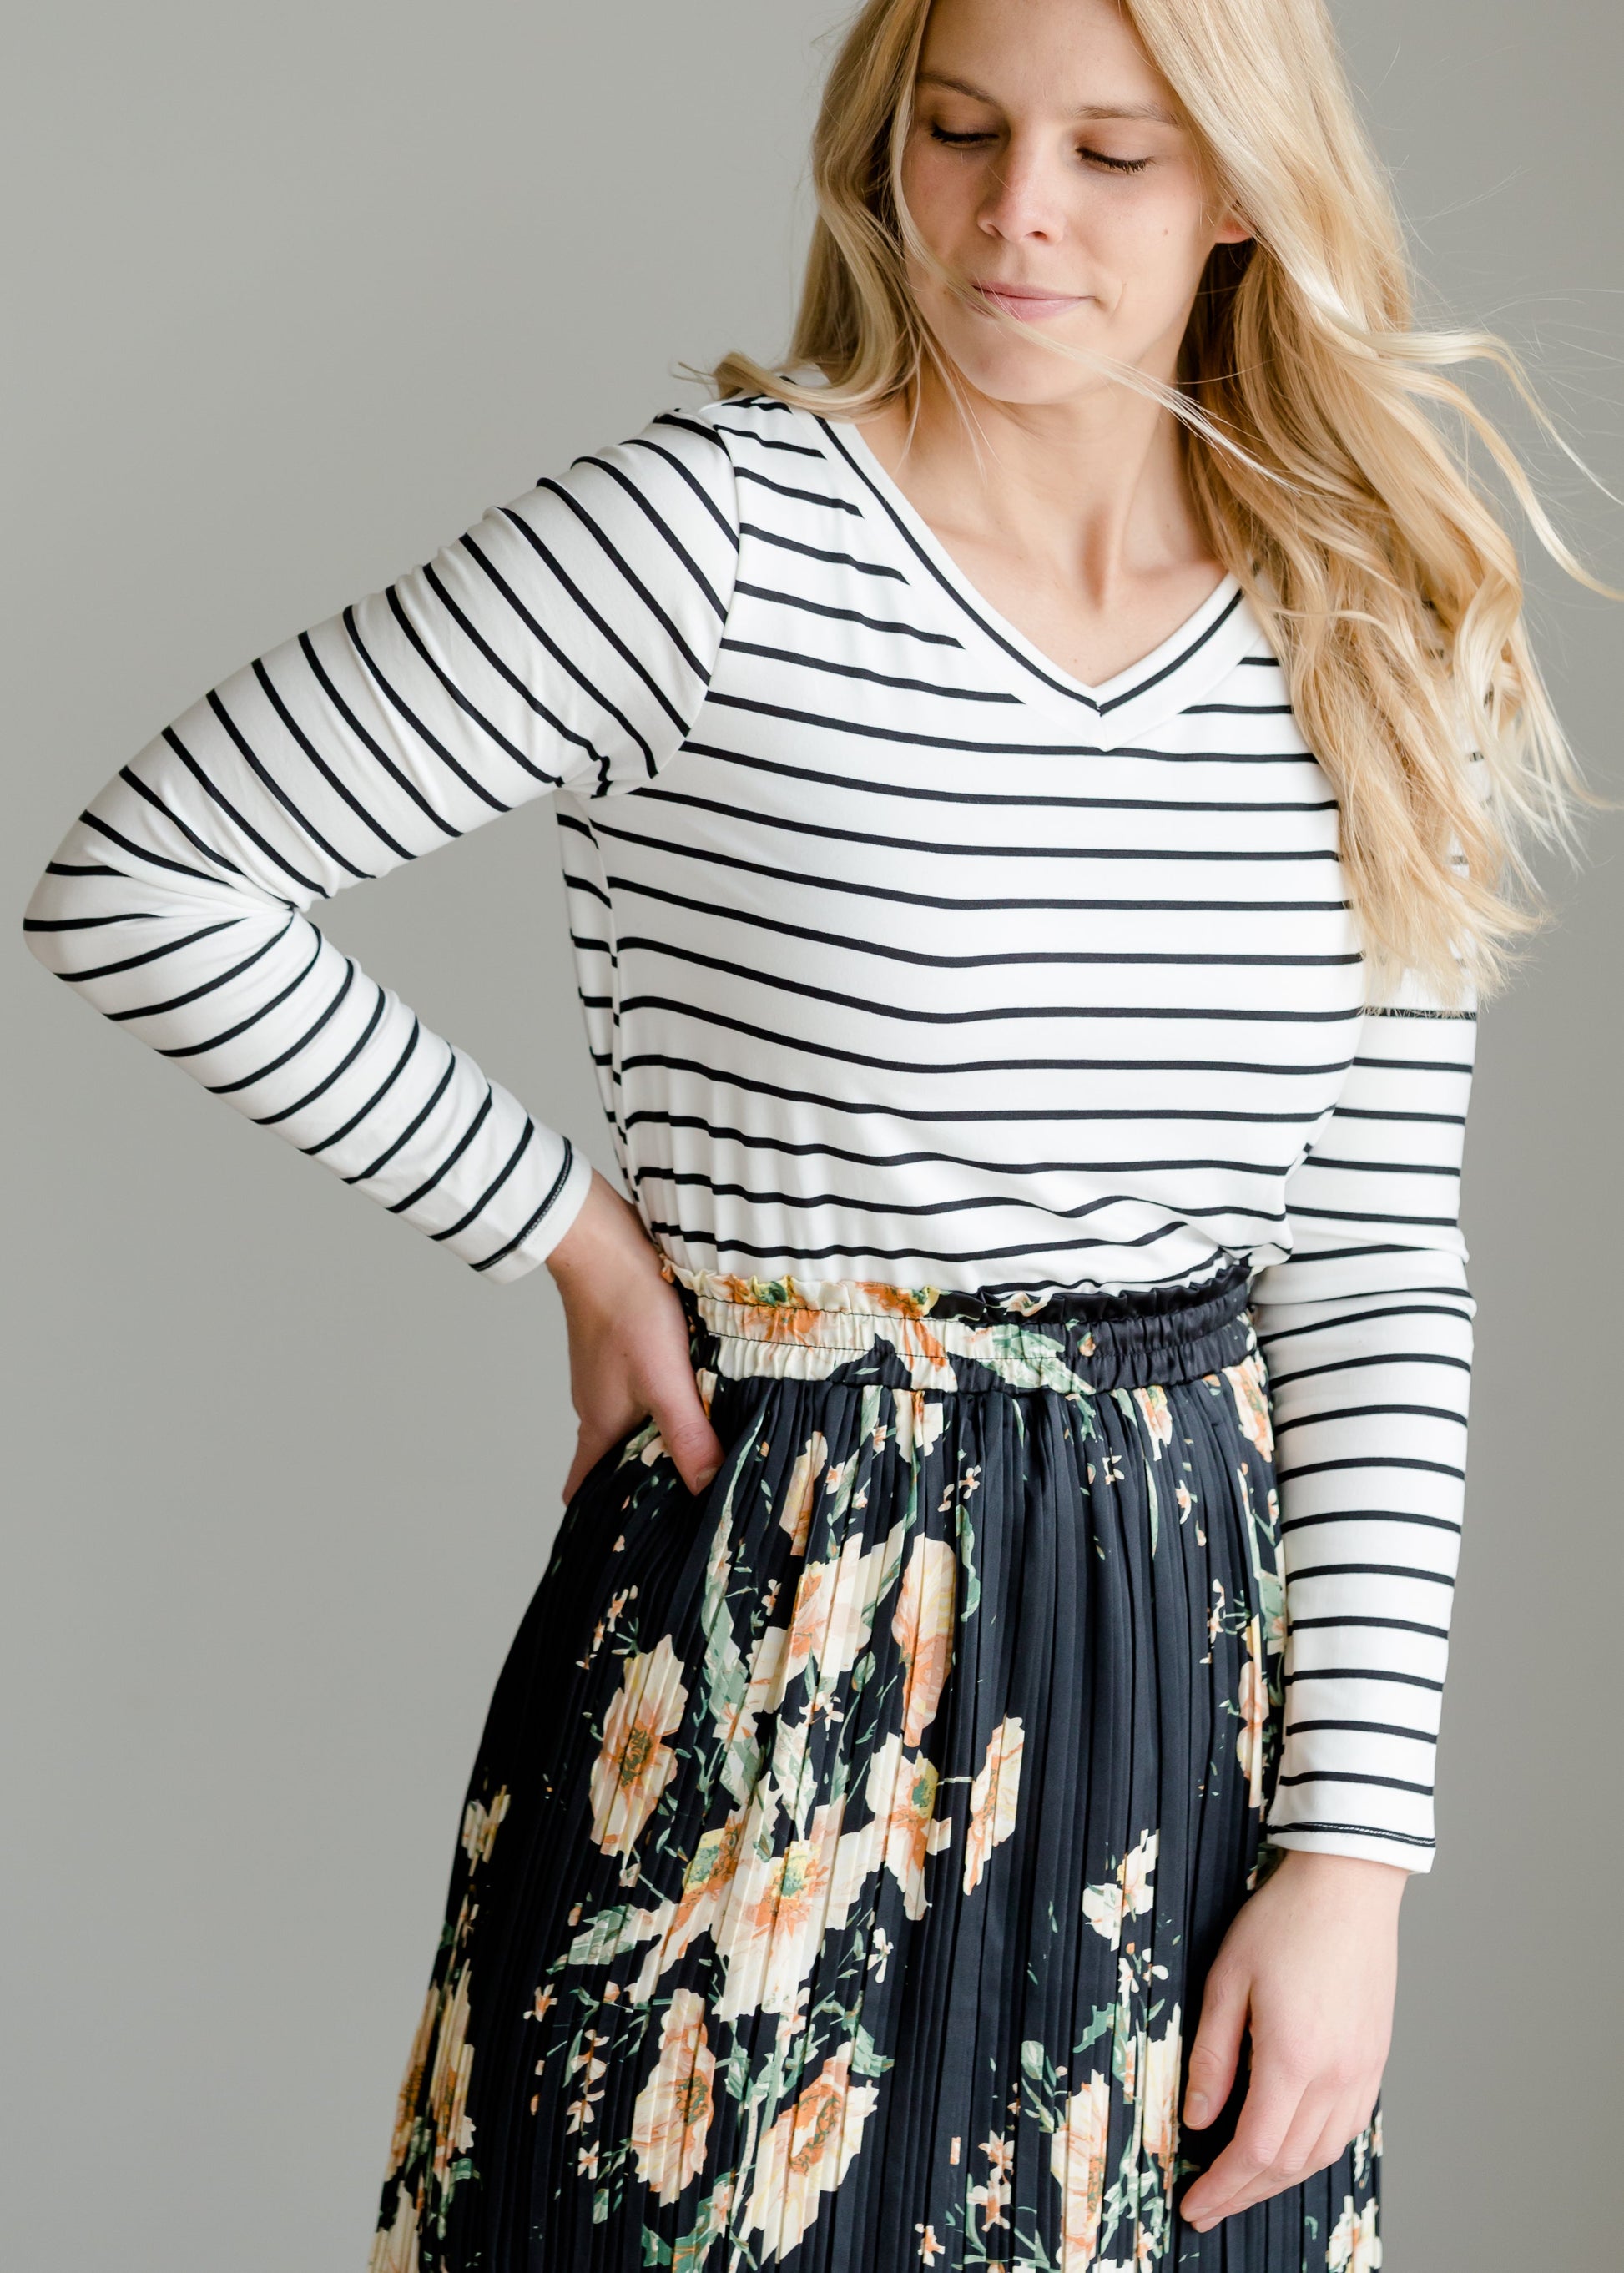 Buttery Soft Striped Top - FINAL SALE Tops